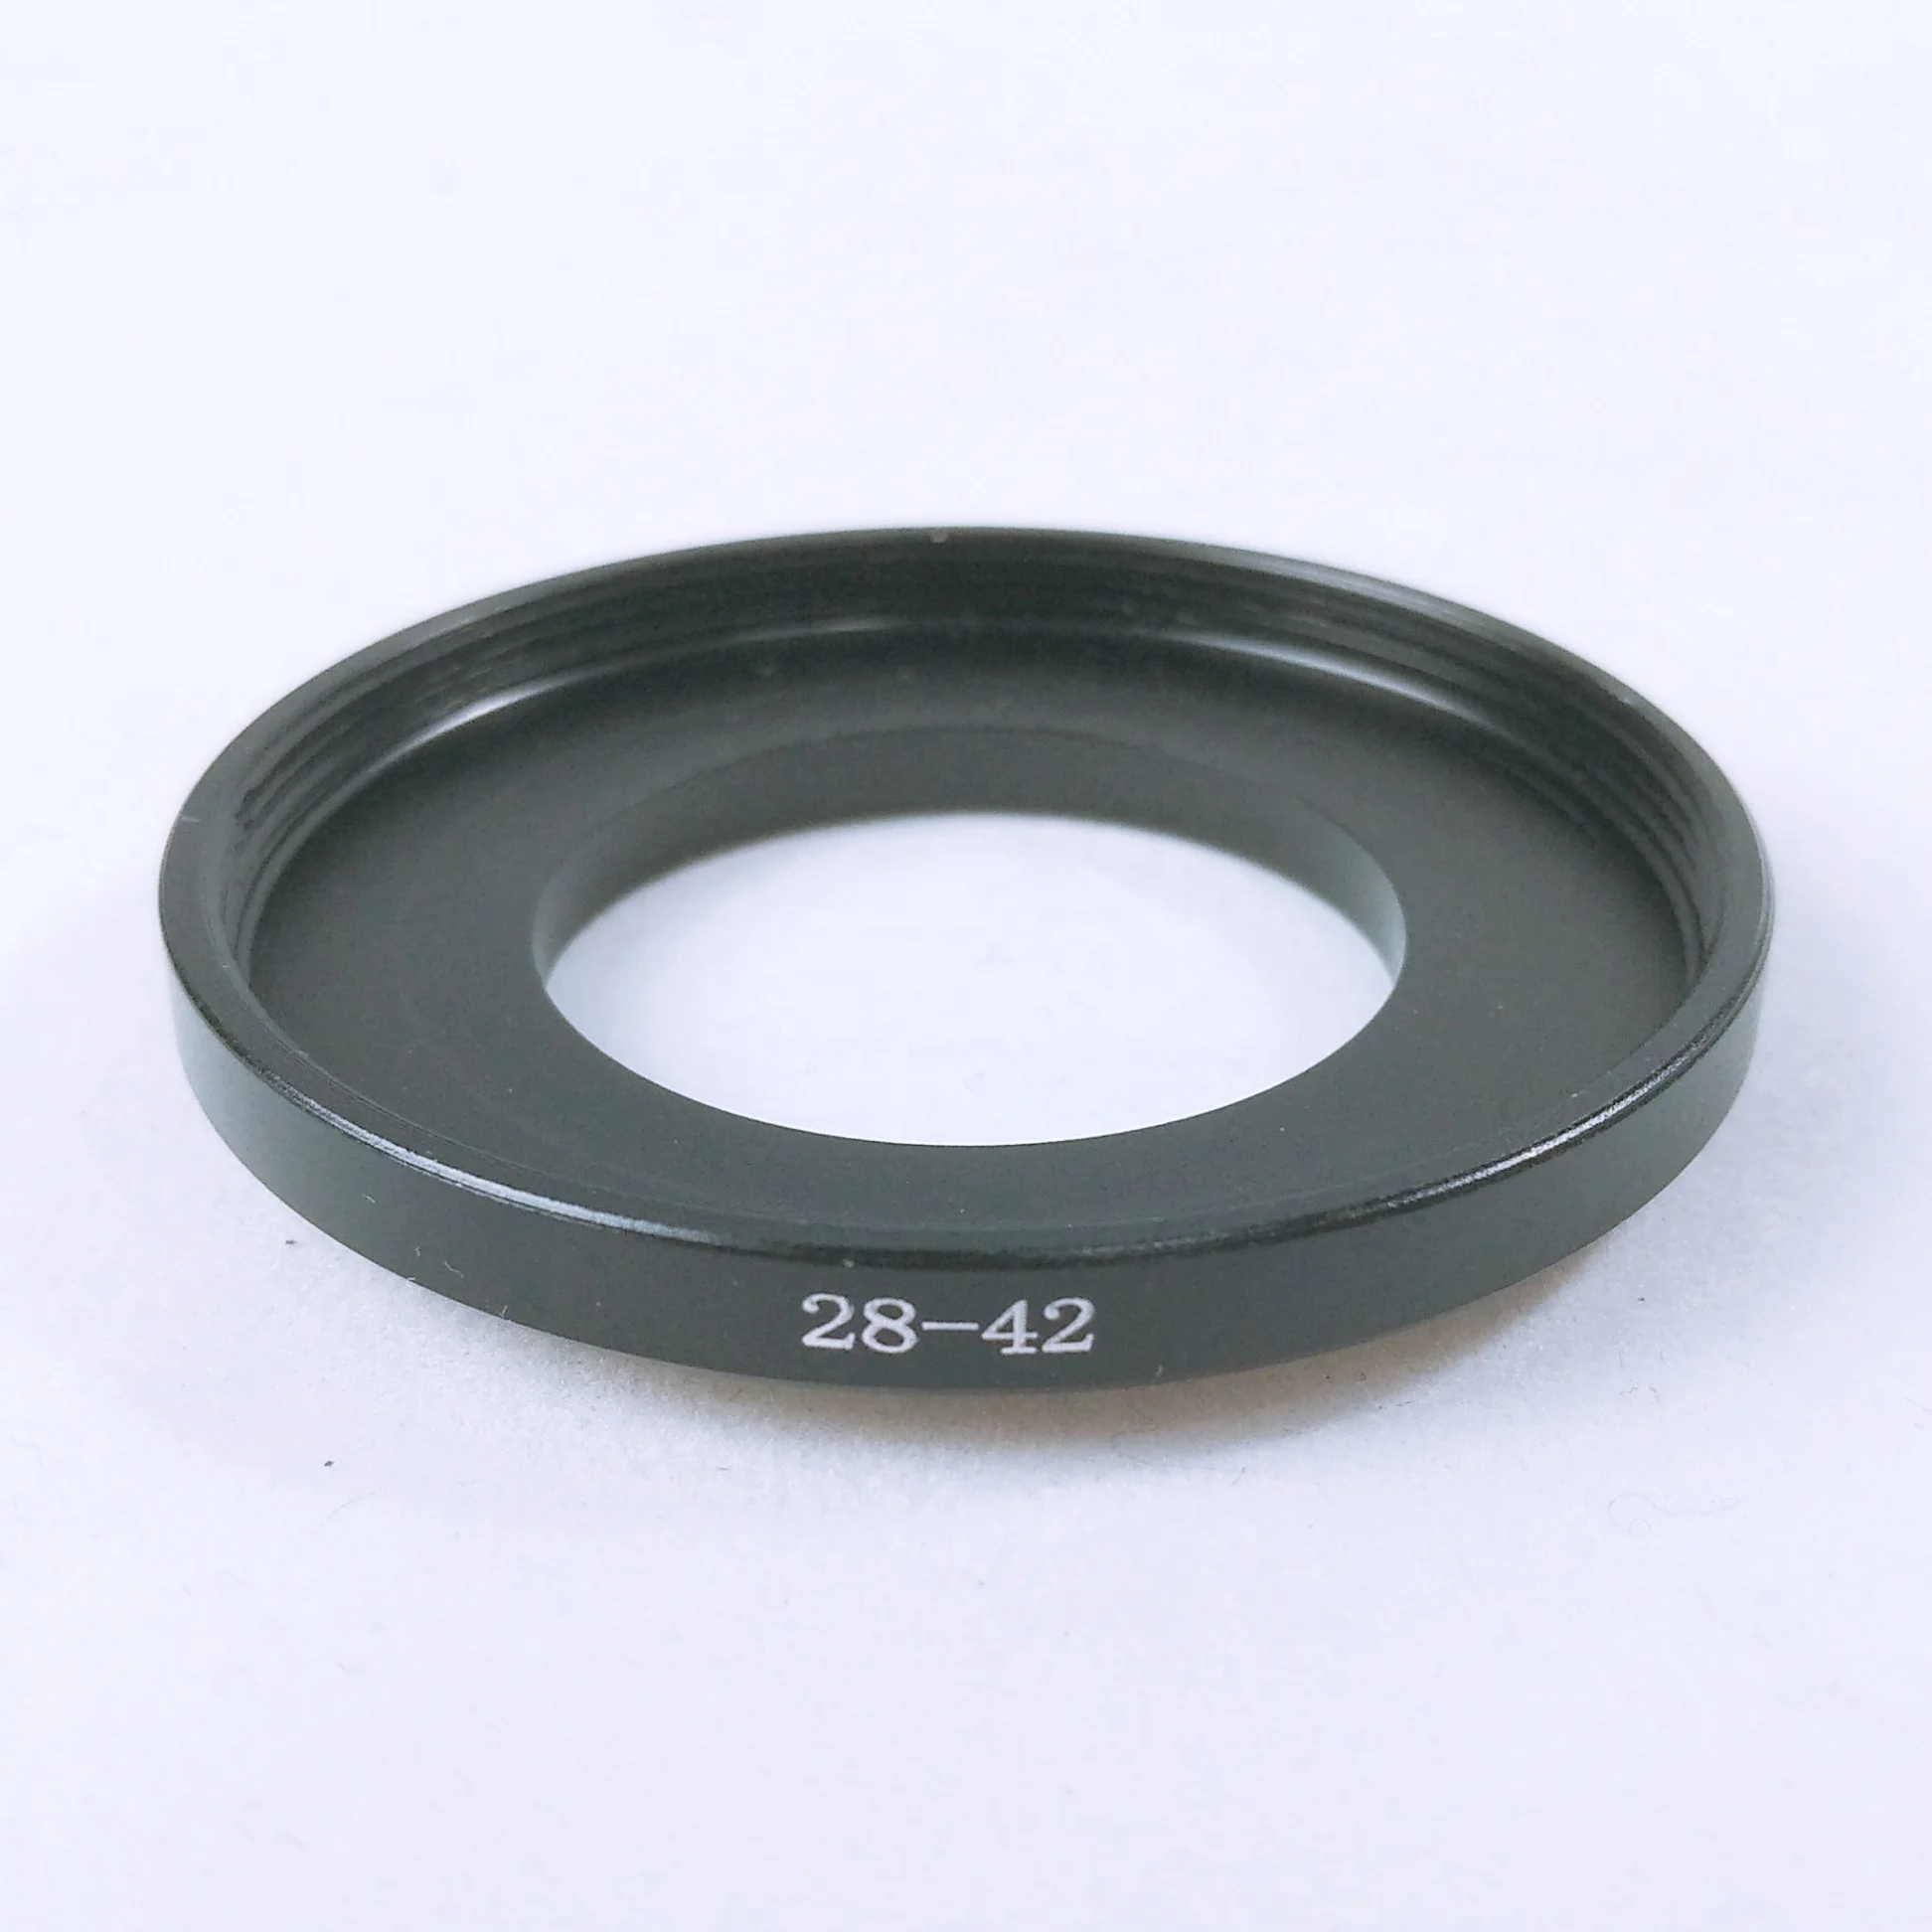 Photographic Equipment digital camera accessories sports camera accessories CNC processing 28mm to 42mm filter adapter ring